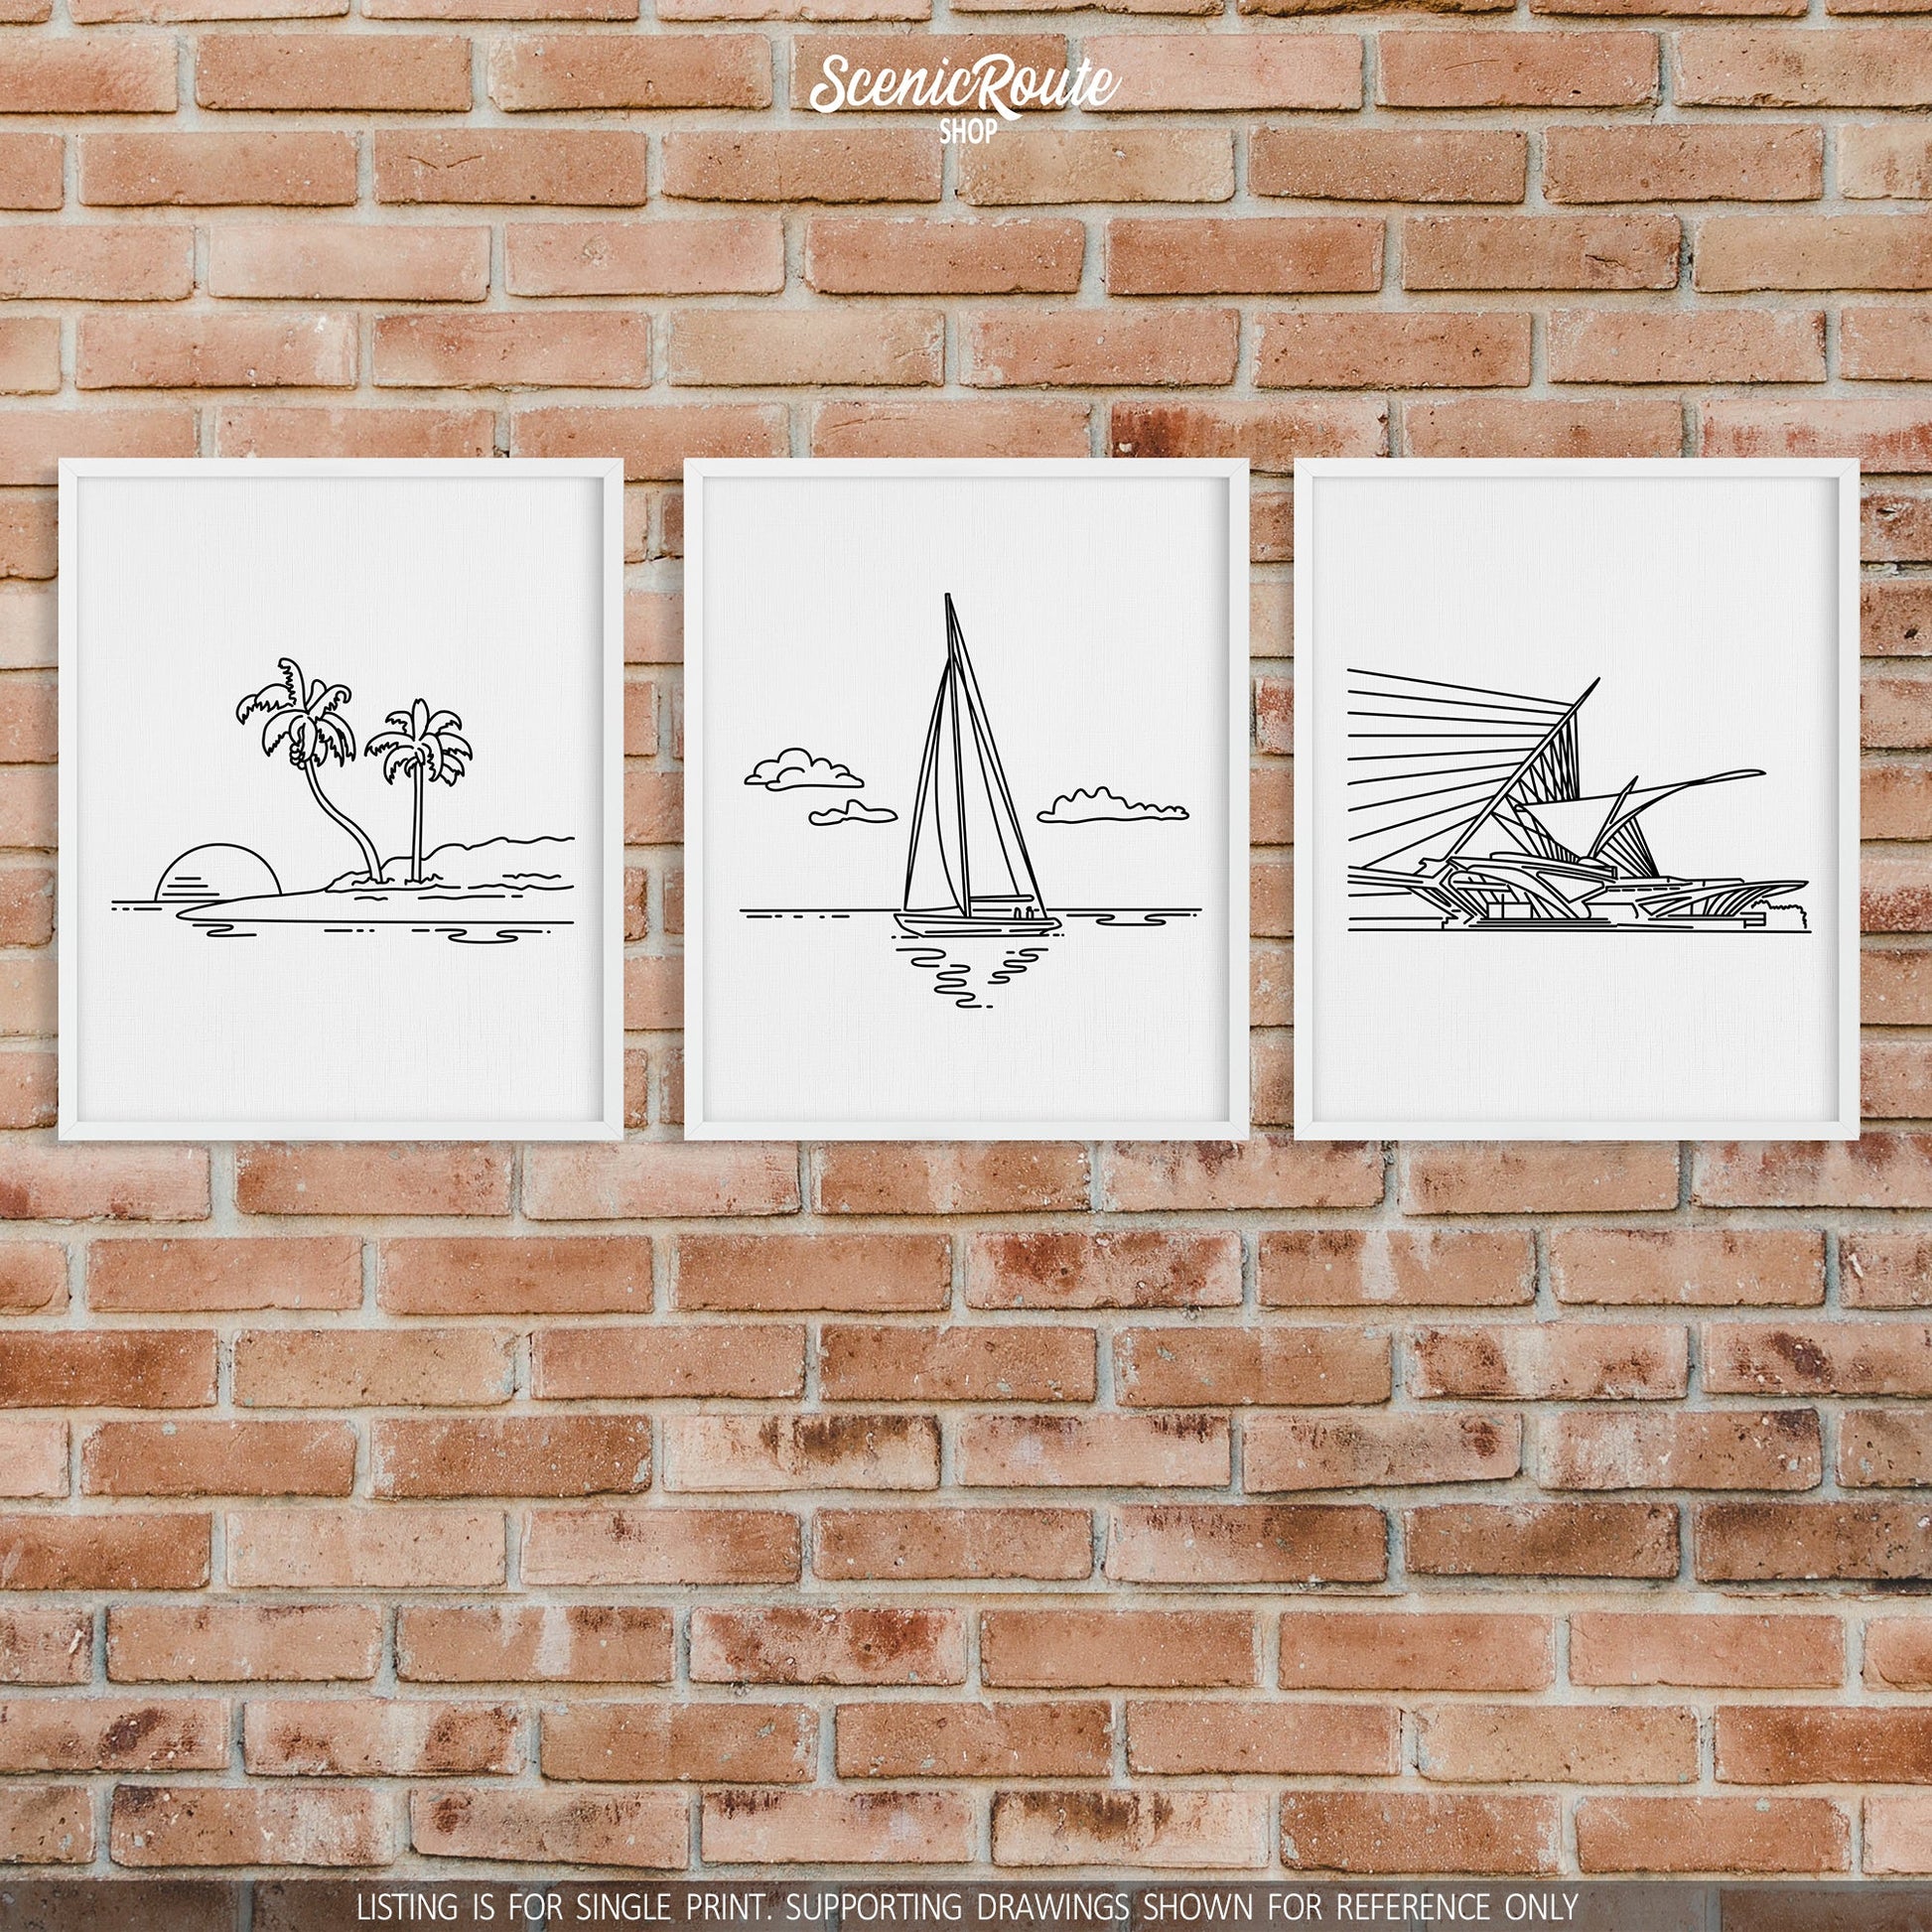 A group of three framed drawings on a brick wall. The line art drawings include an Island, Sailing, and the Milwaukee Art Museum